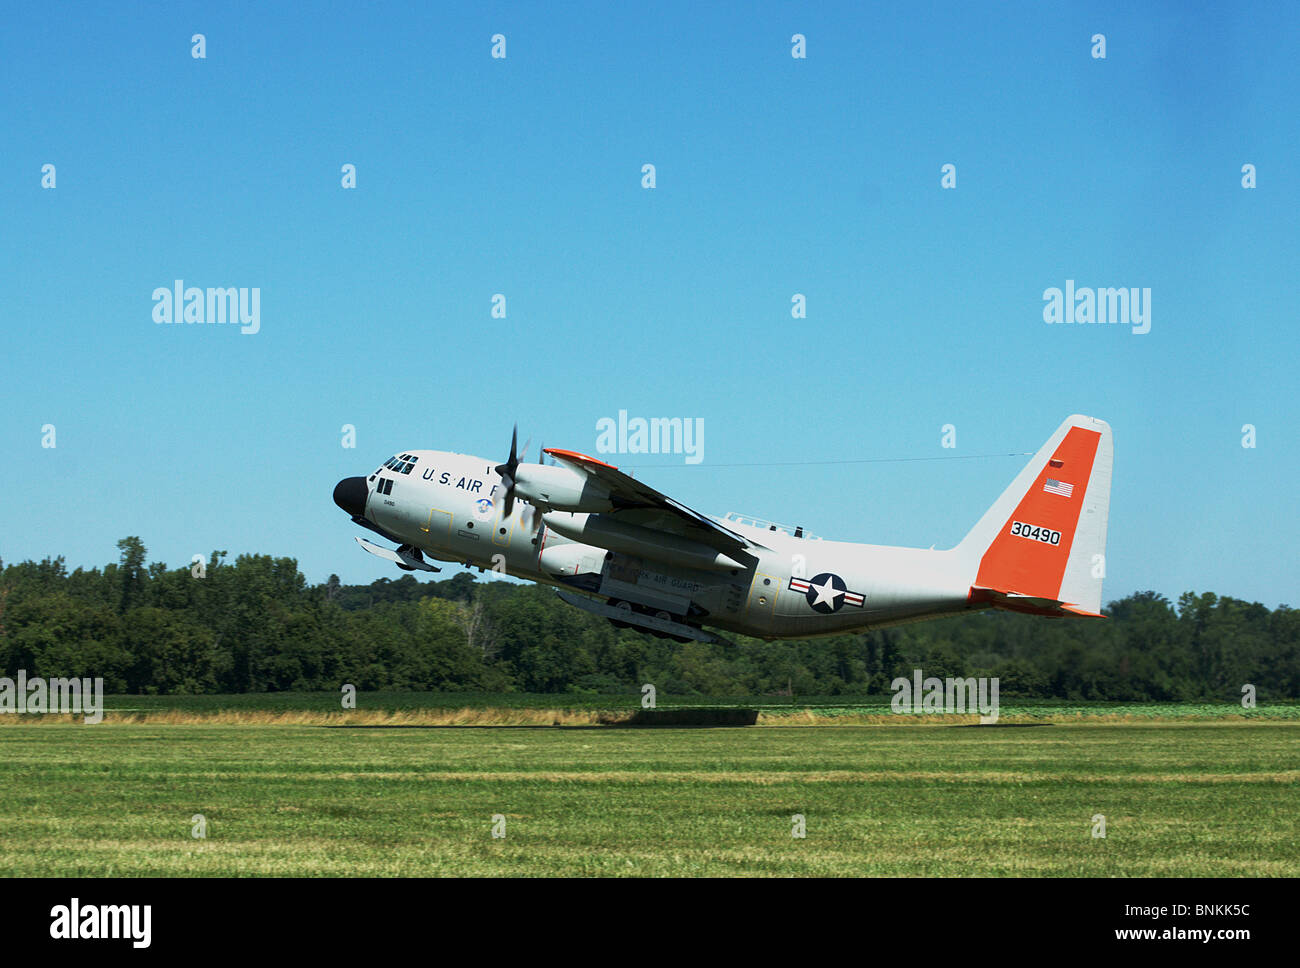 C-130 Hercules takes off from Geneseo Air Show grass runway with skids. Stock Photo